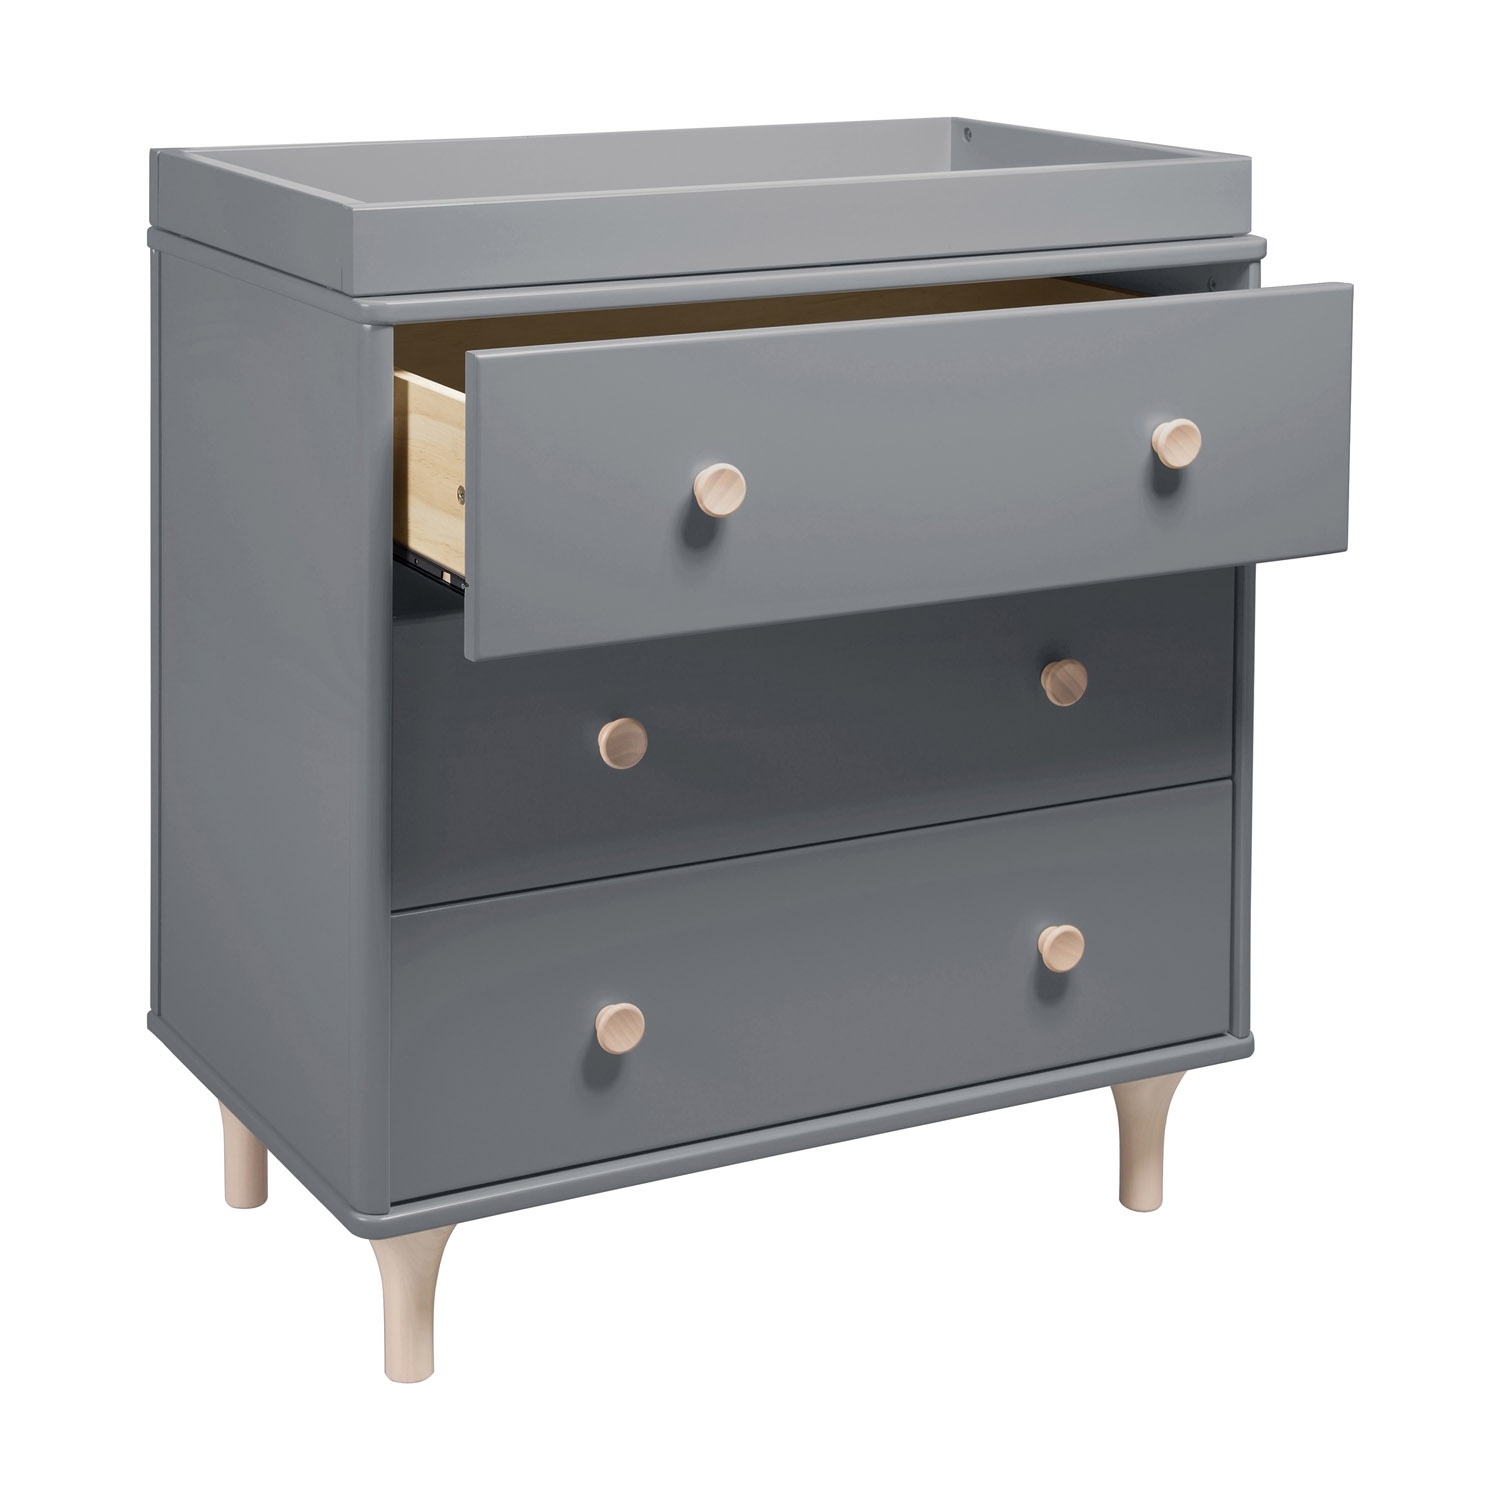 Babyletto Lolly Modern Classic Grey Changing Station Dresser - Image 2